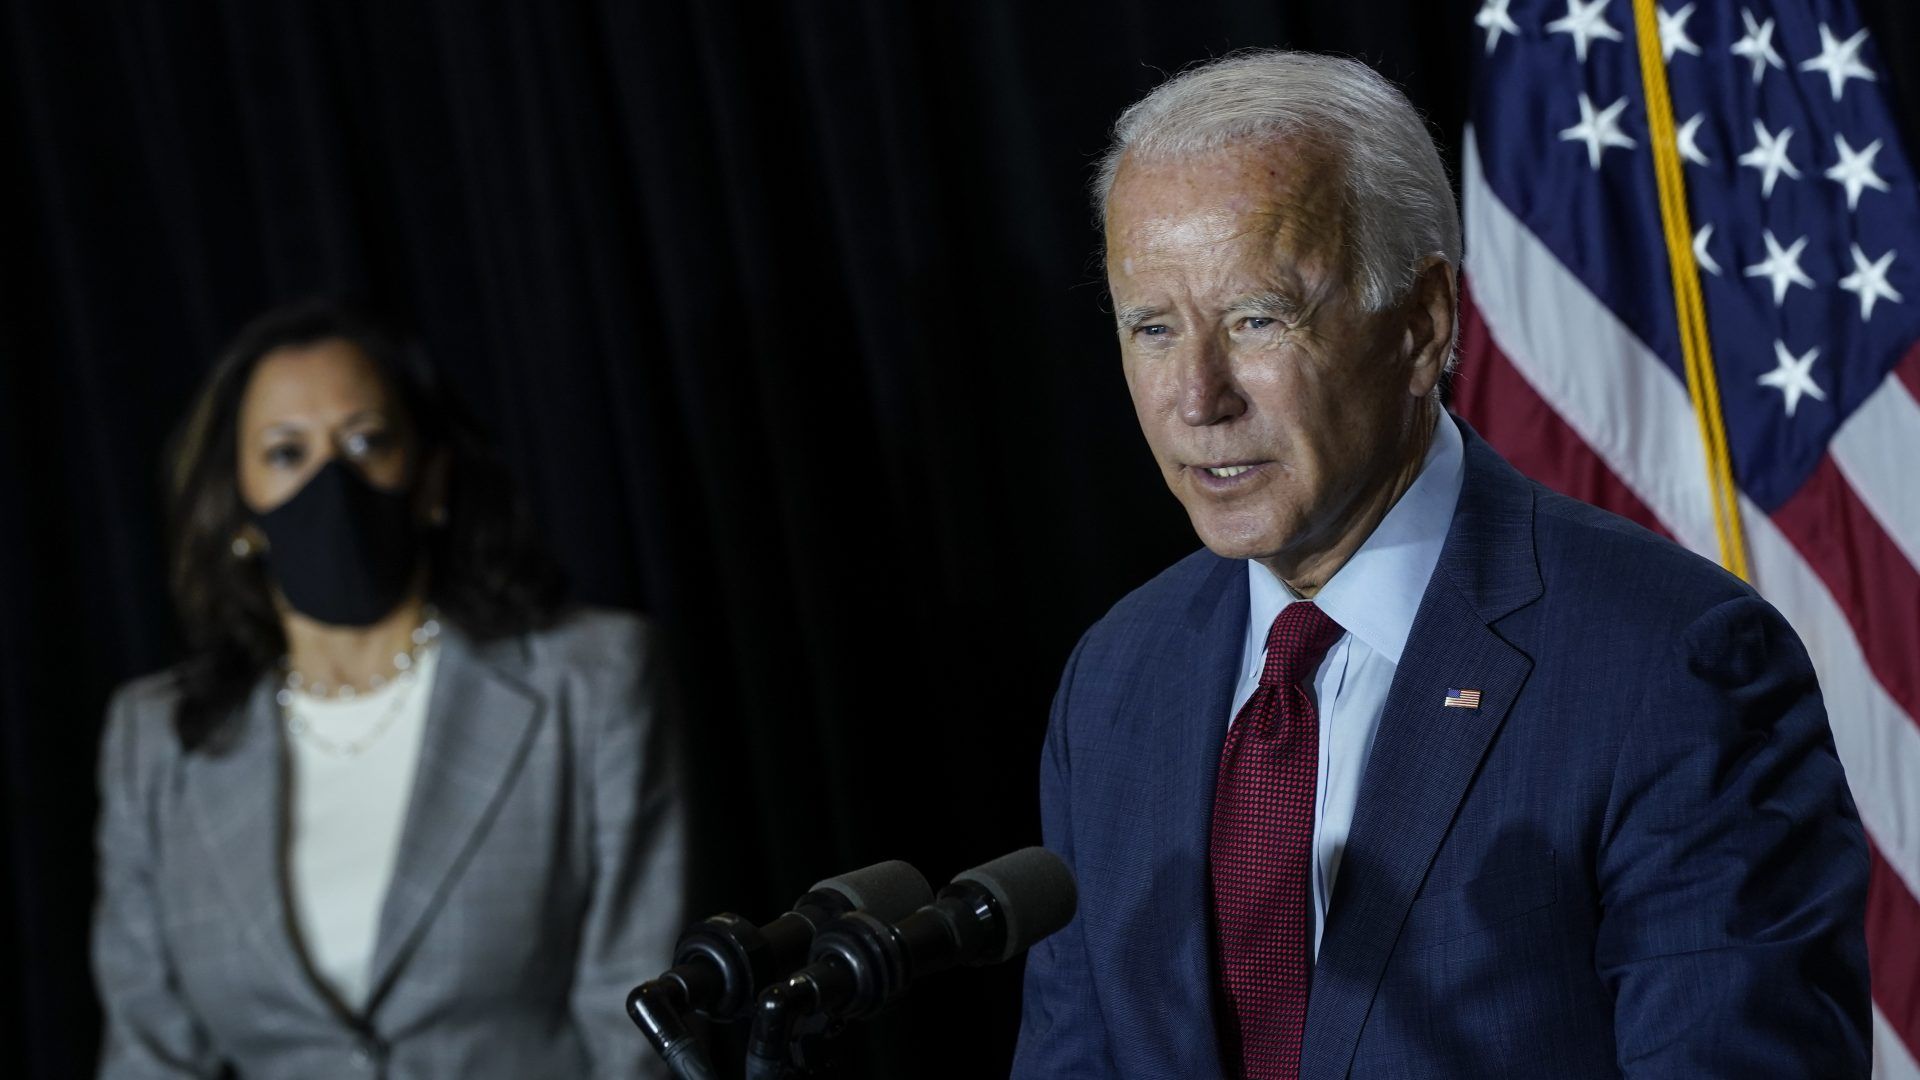 Joe Biden: For the next 3 months, all Americans should wear a mask when outside